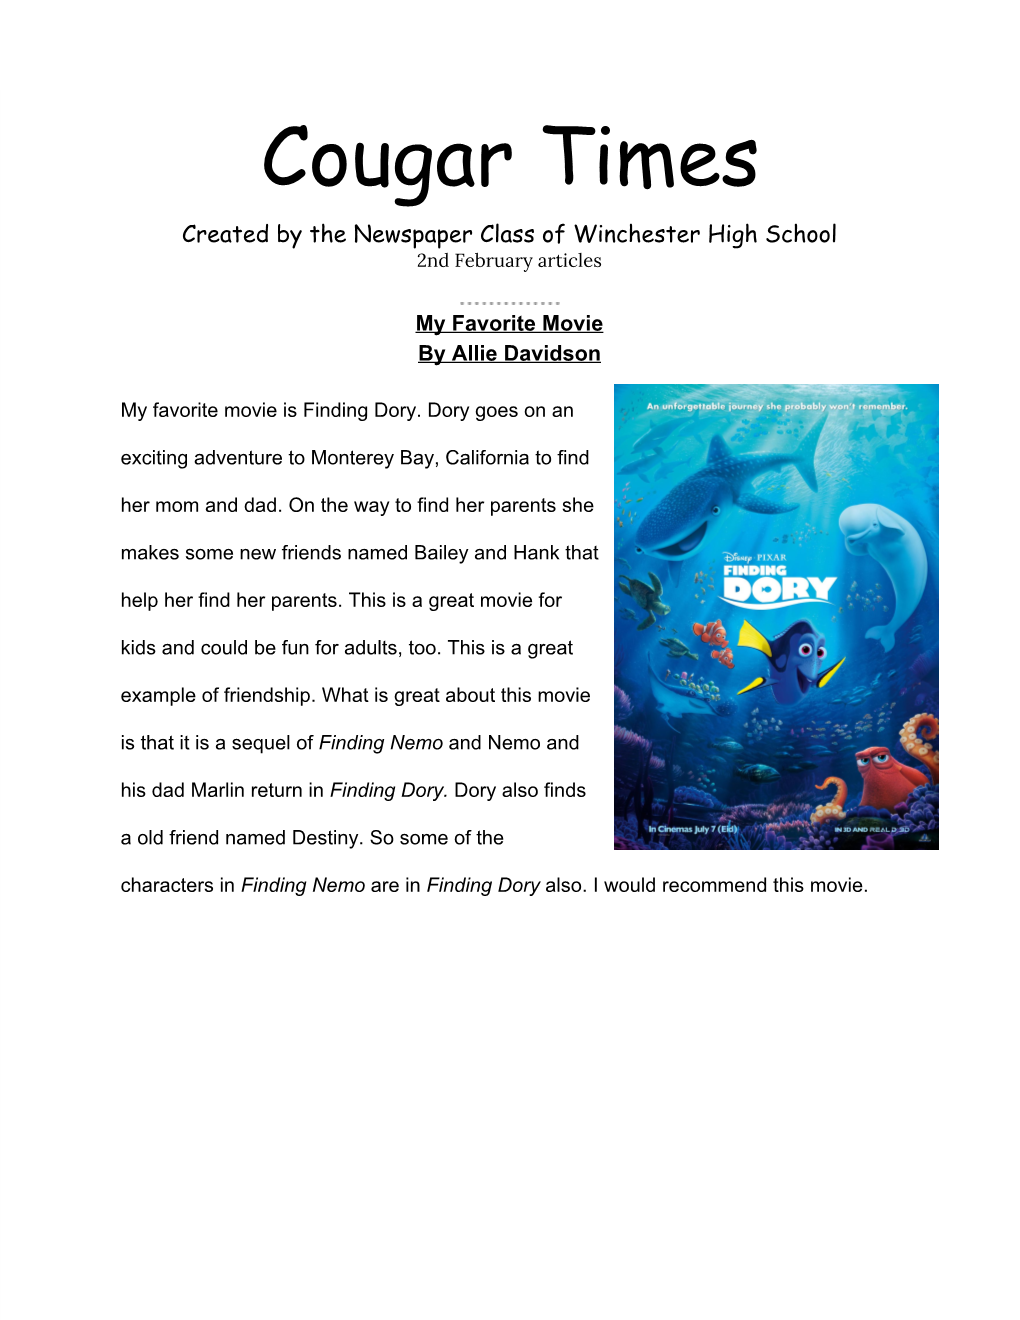 Cougar Times Created by the Newspaper Class of Winchester High School 2Nd February Articles